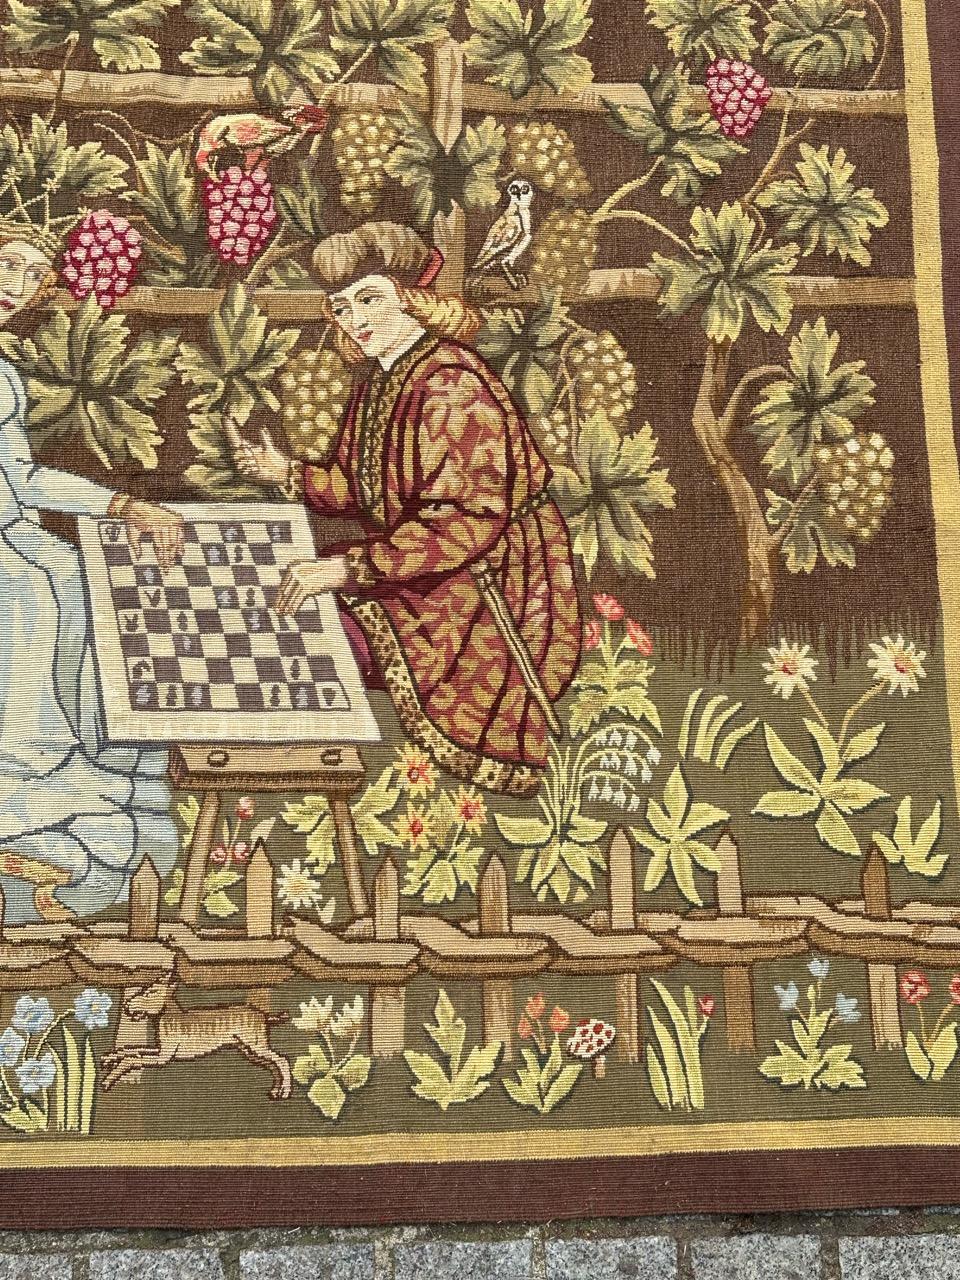 Hand-Woven Wonderful mid century French Aubusson Tapestry medieval play chess For Sale